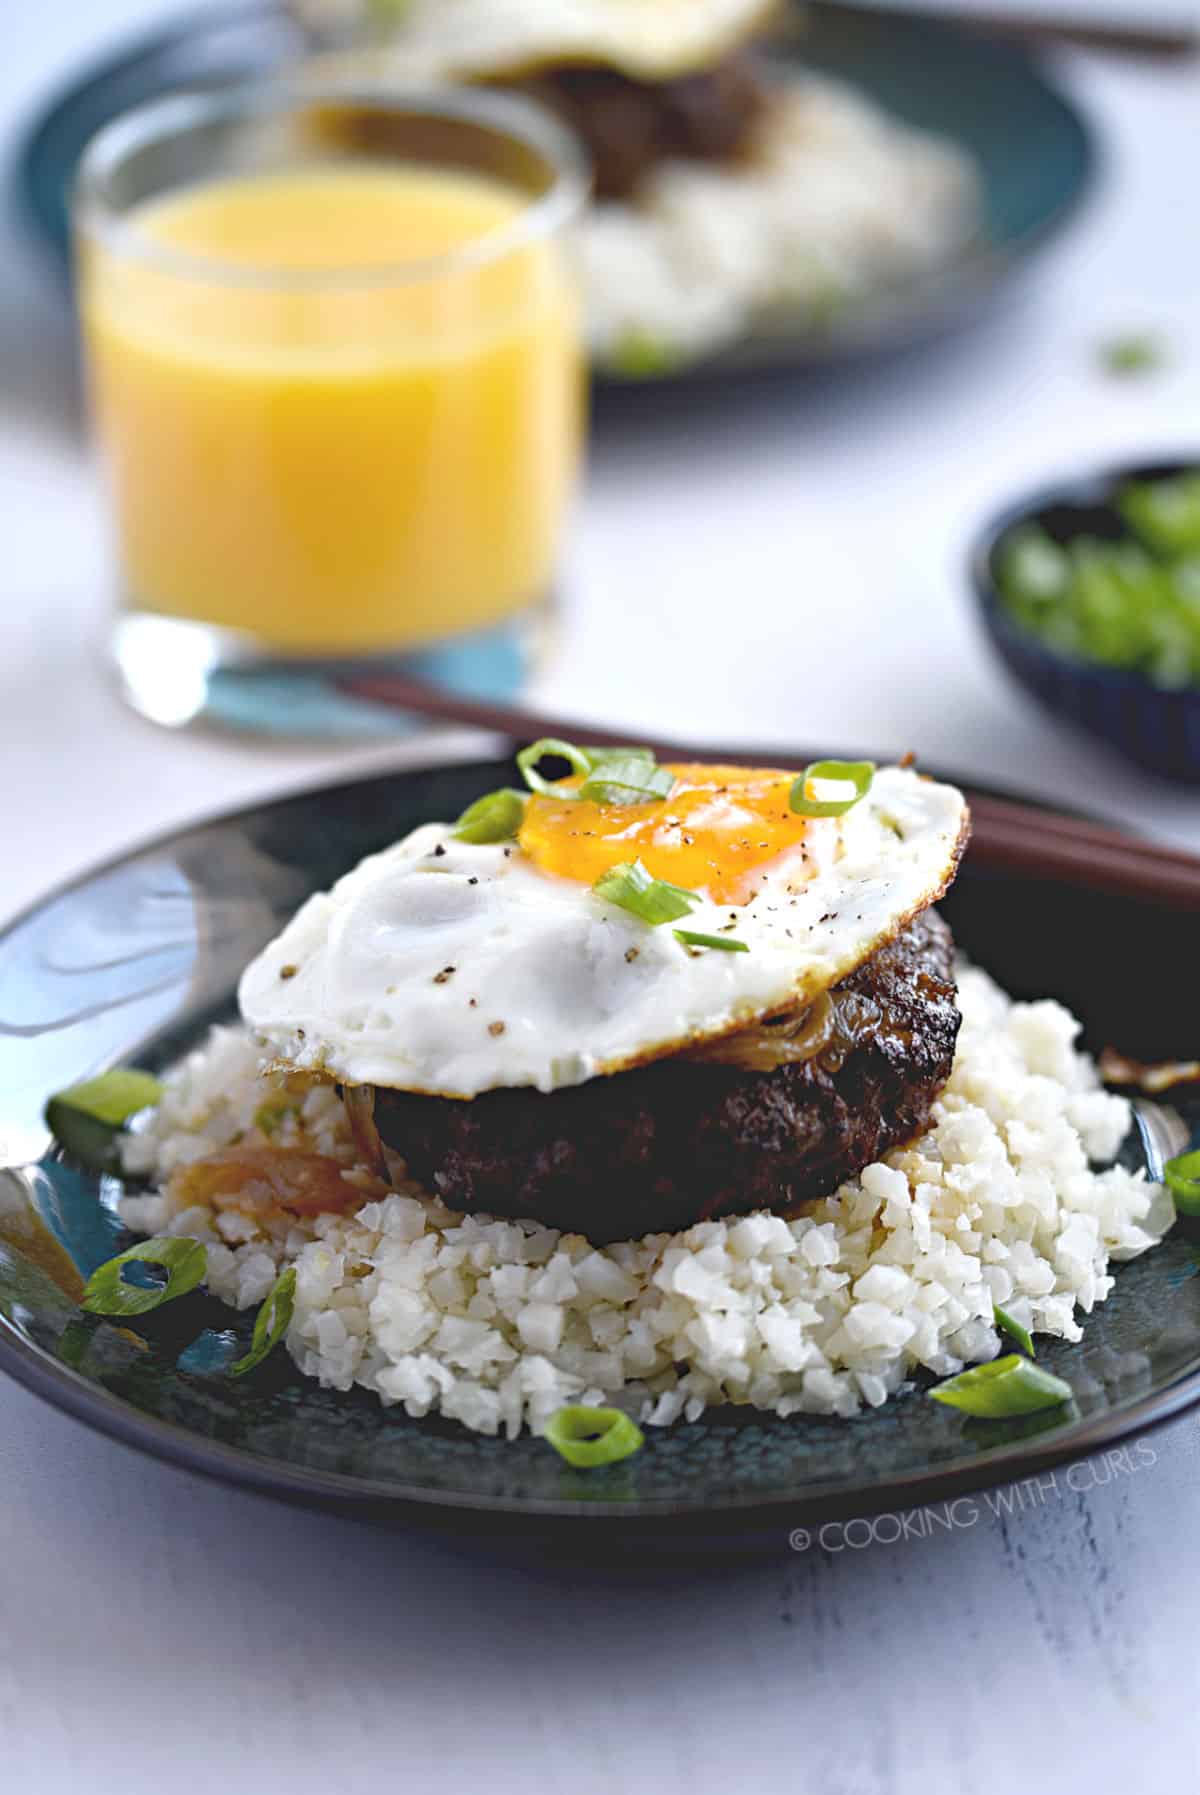 a burger patty topped with brown gravy, fried egg and green onions on a bed of rice with a glass of orange juice and a second plate of food in the background.